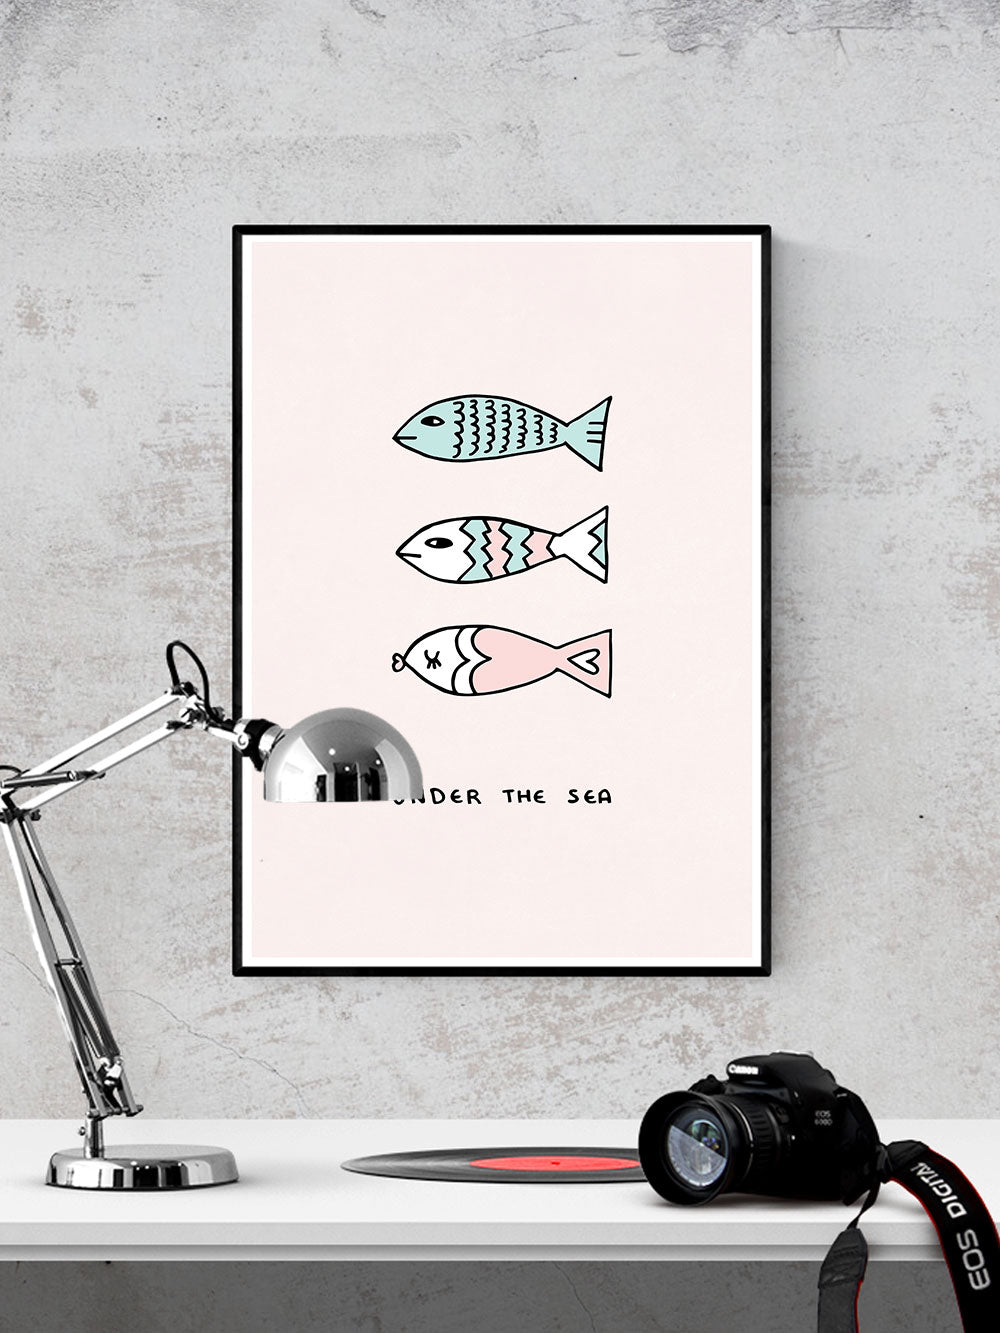 Under the Sea Fish Art Print  in a frame on a wall